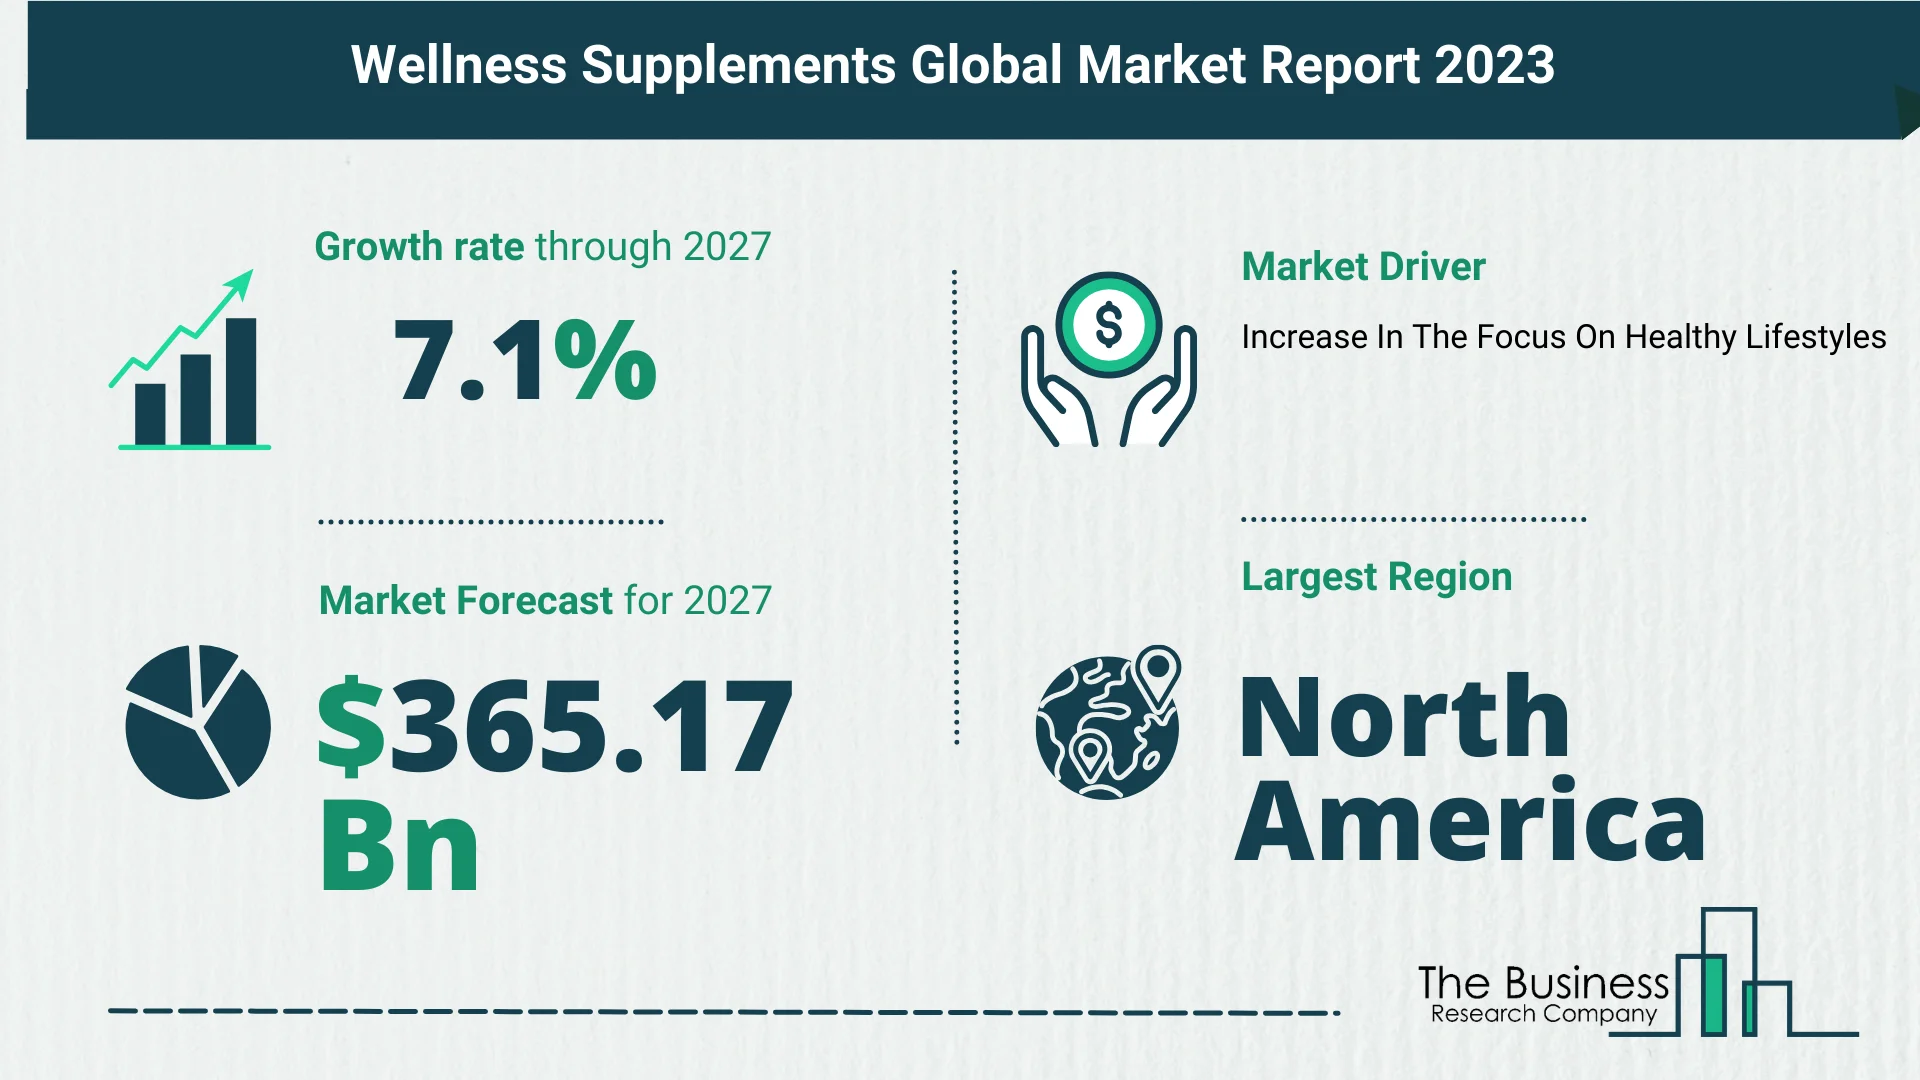 Global Wellness Supplements Market Analysis 2023: Size, Share, And Key Trends